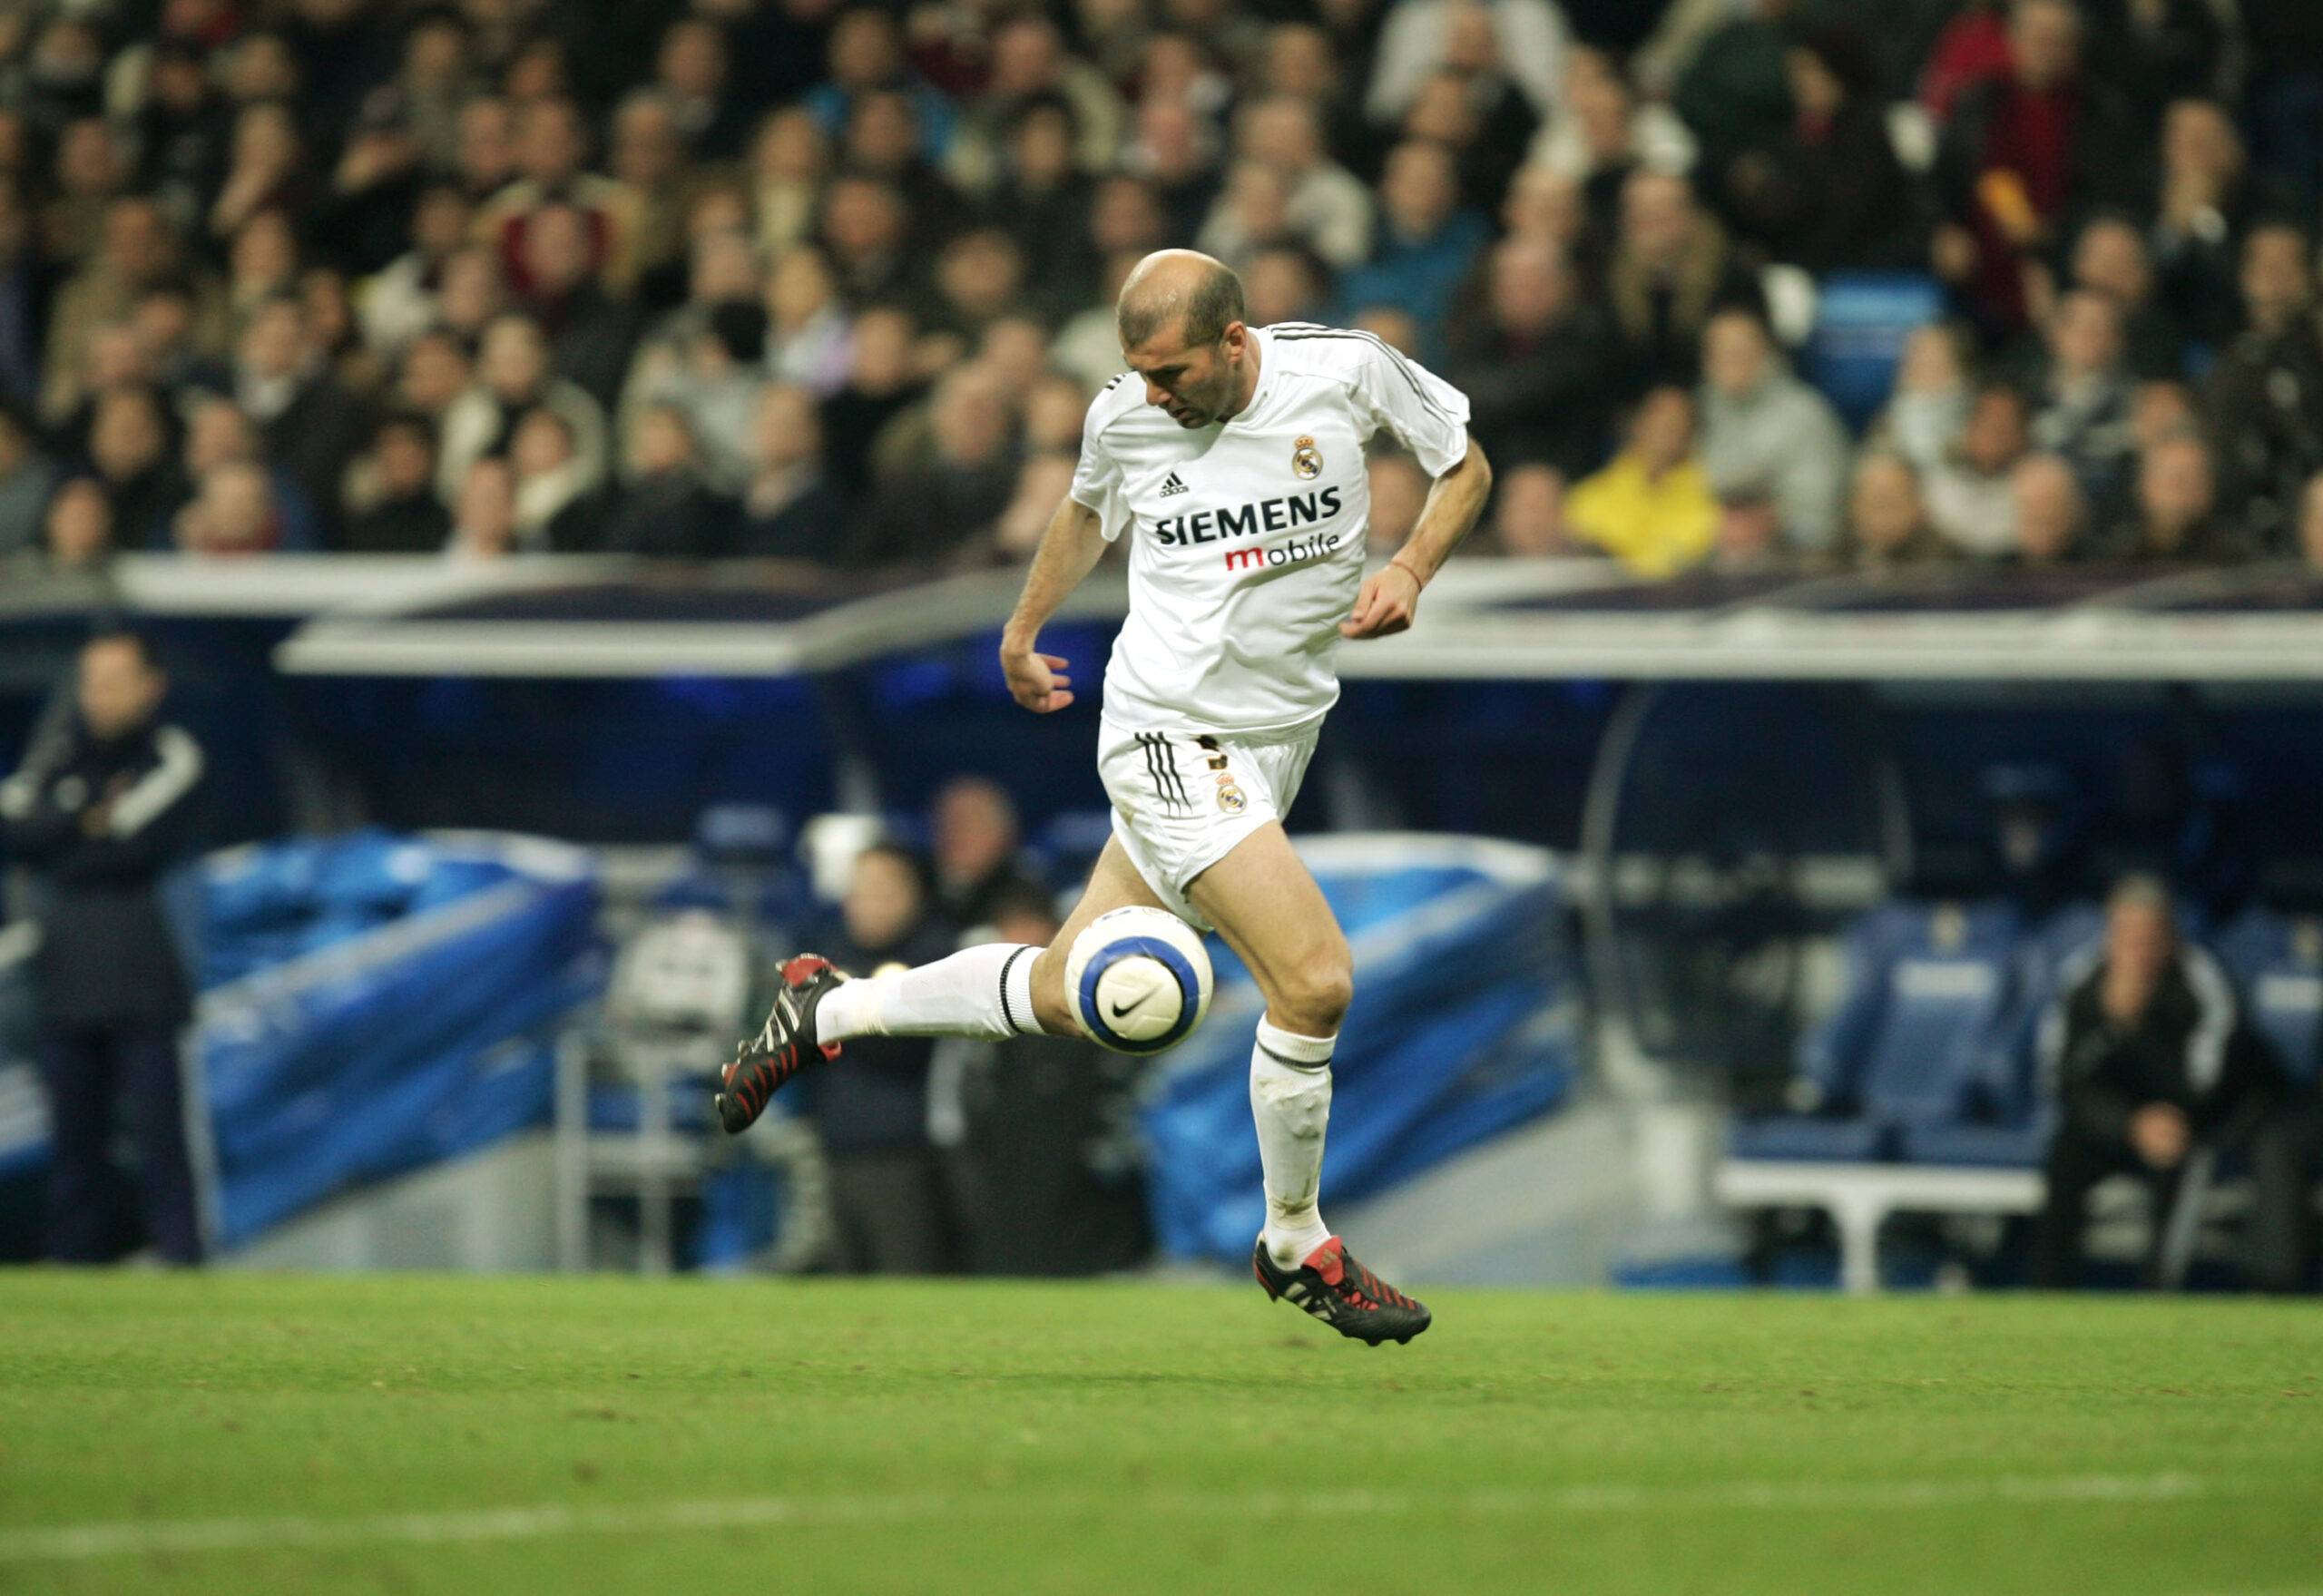 Zidane controls the ball for Real Madrid.